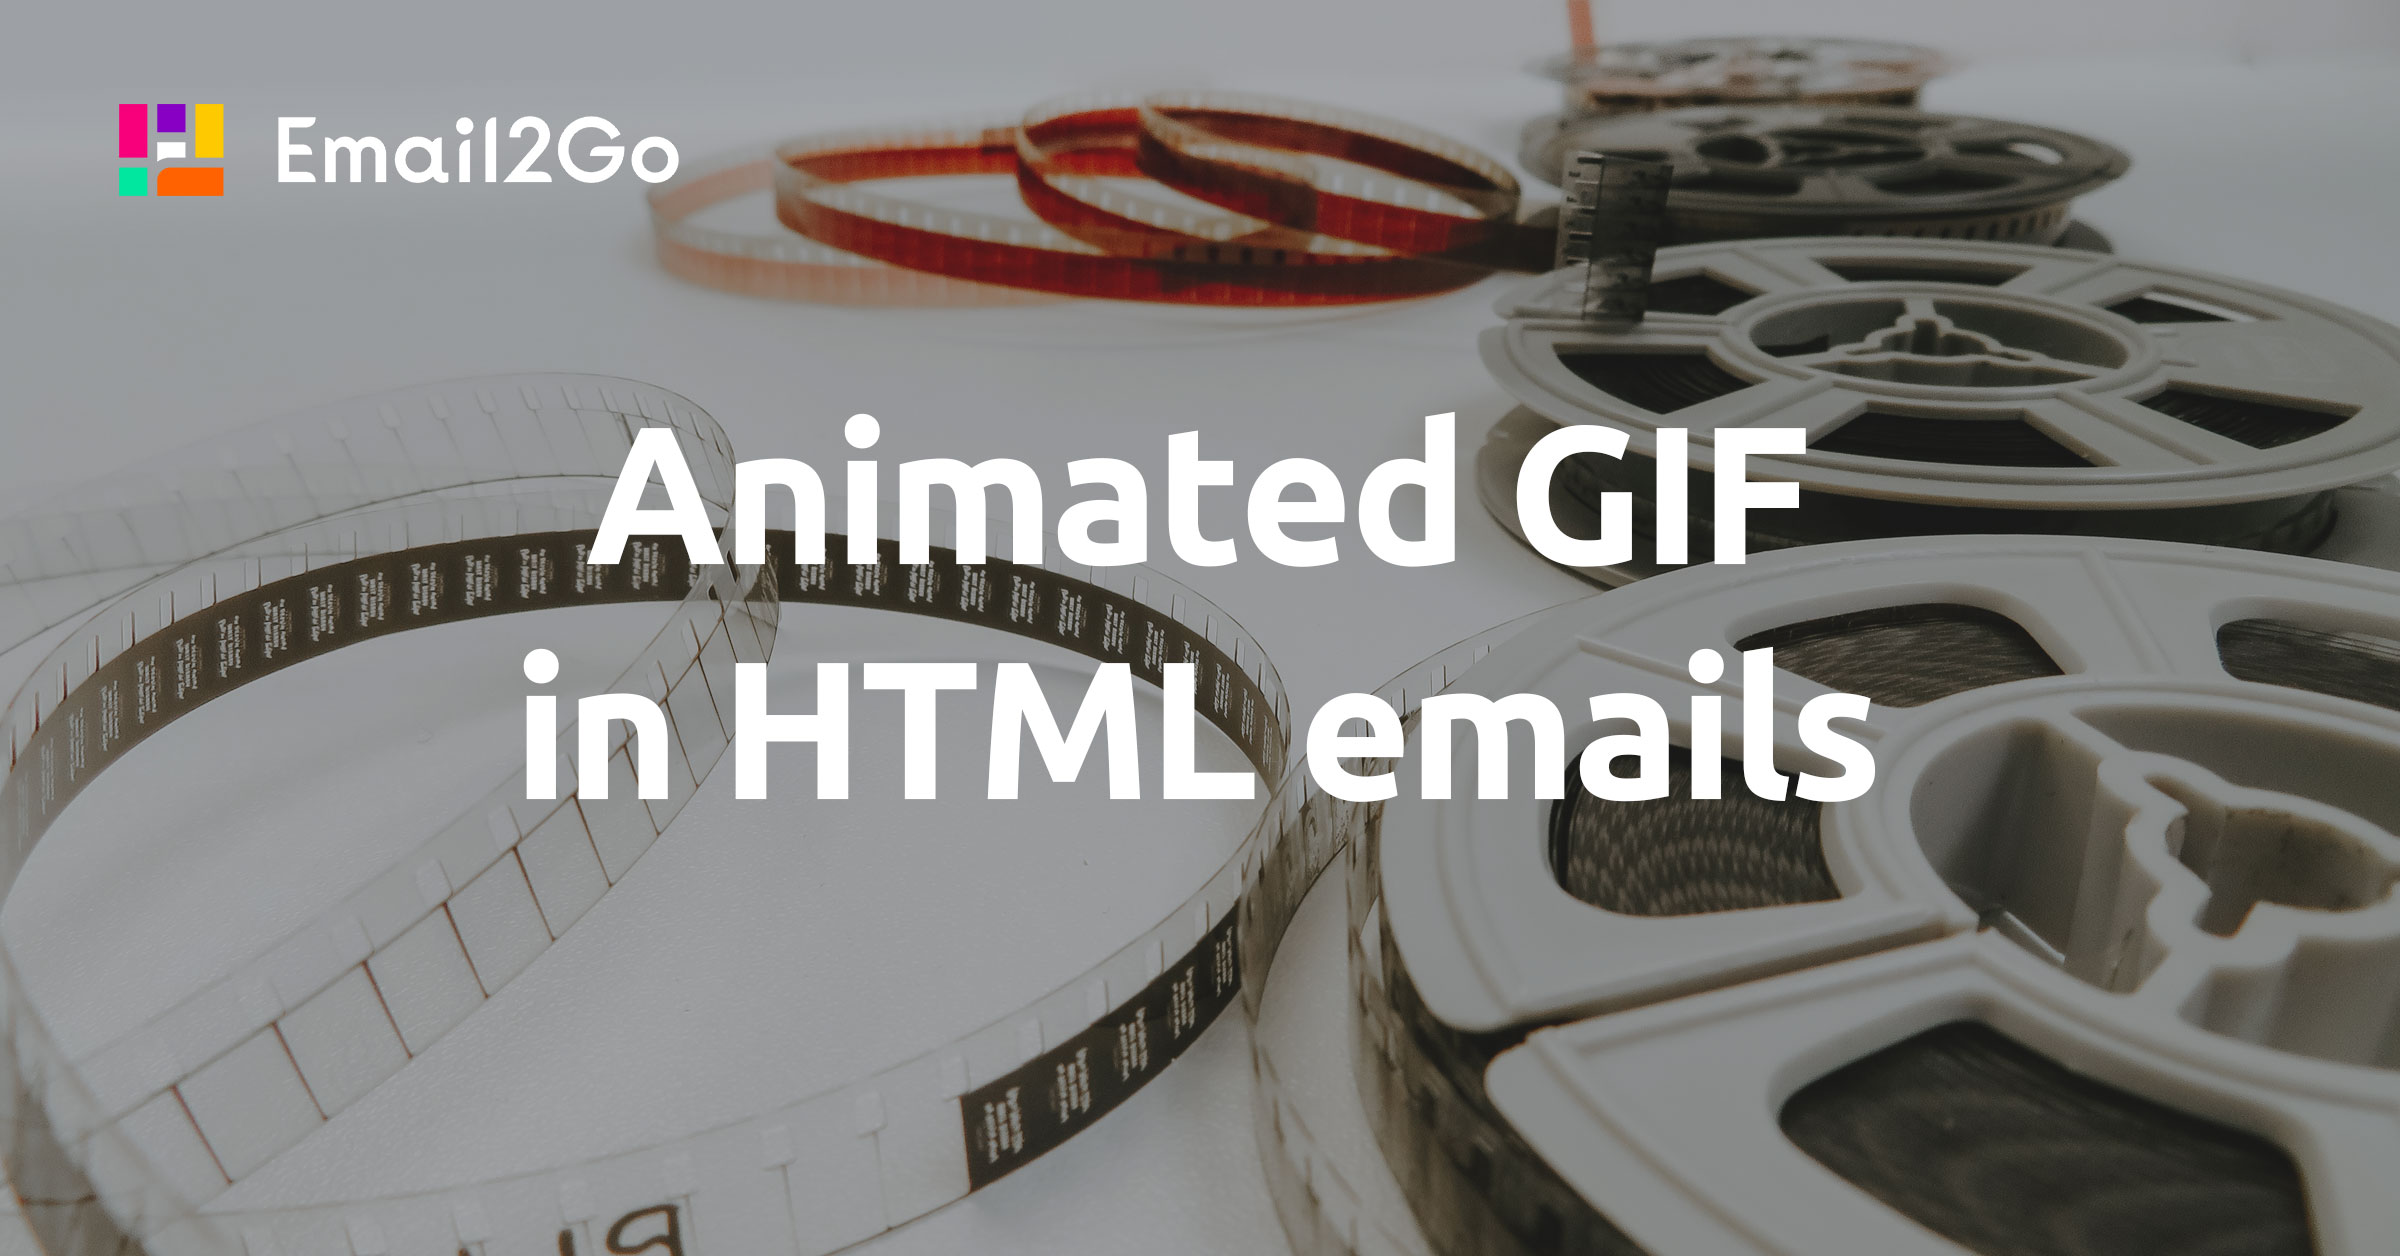 Using Animated GIF in HTML emails - Email2Go